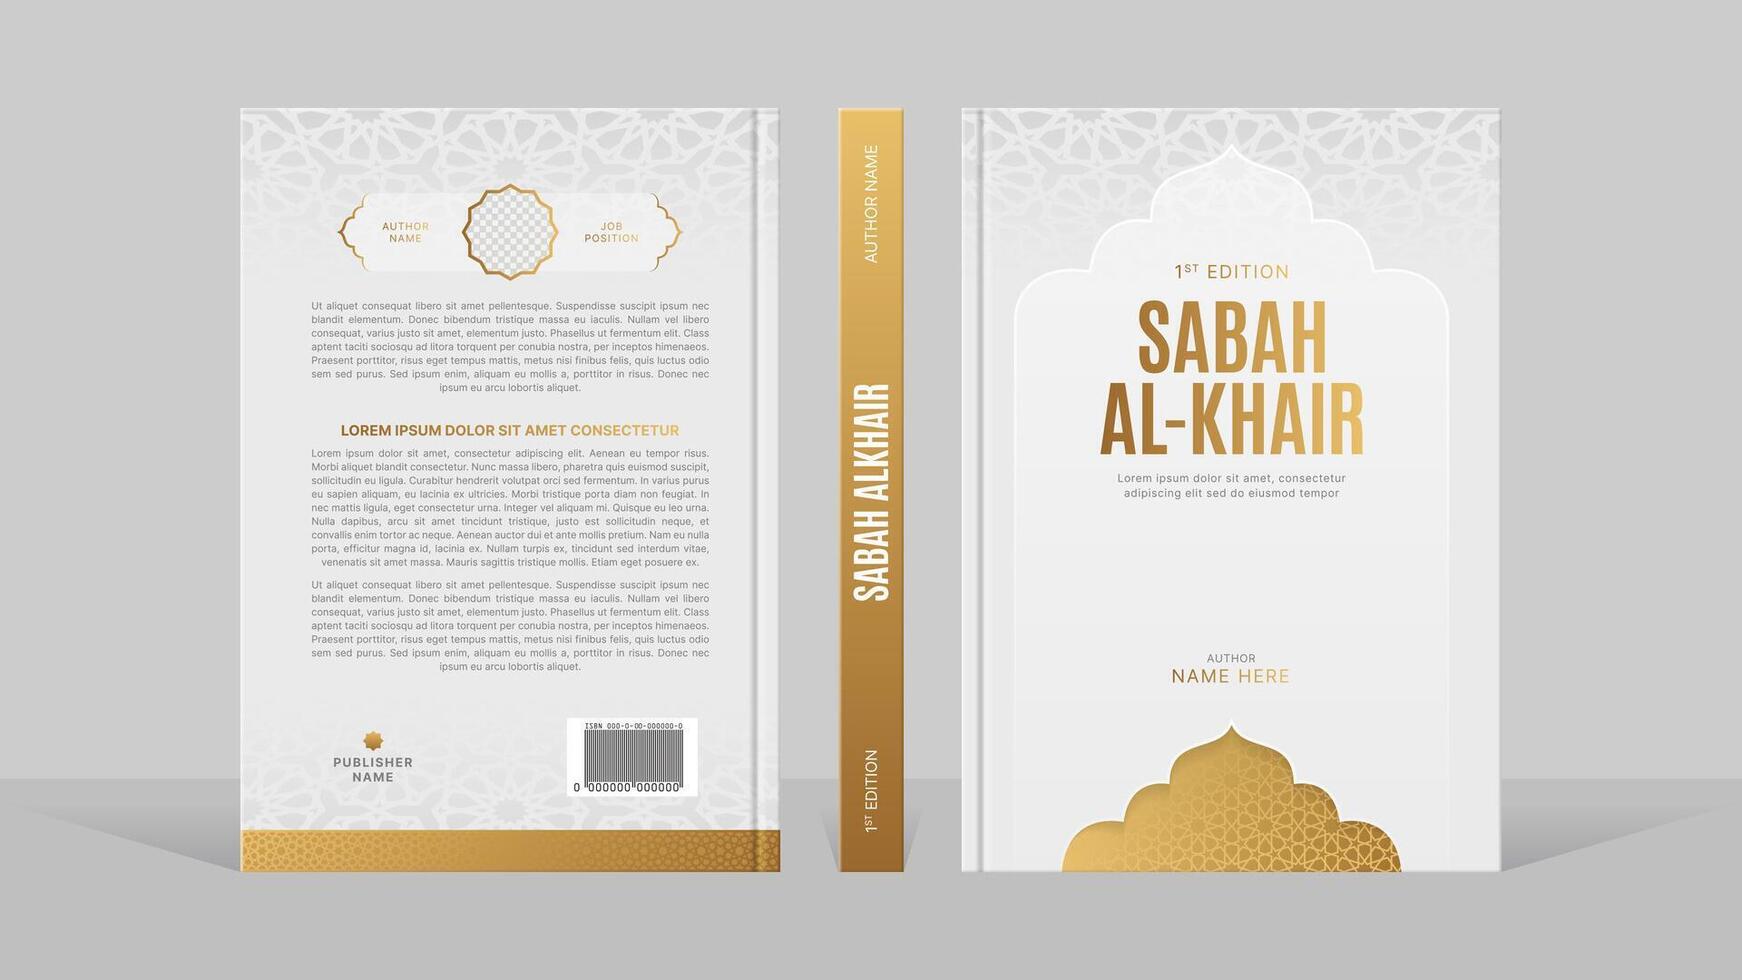 Islamic Arabic Style Book Cover Template Design with Arabesque Moroccan Pattern vector